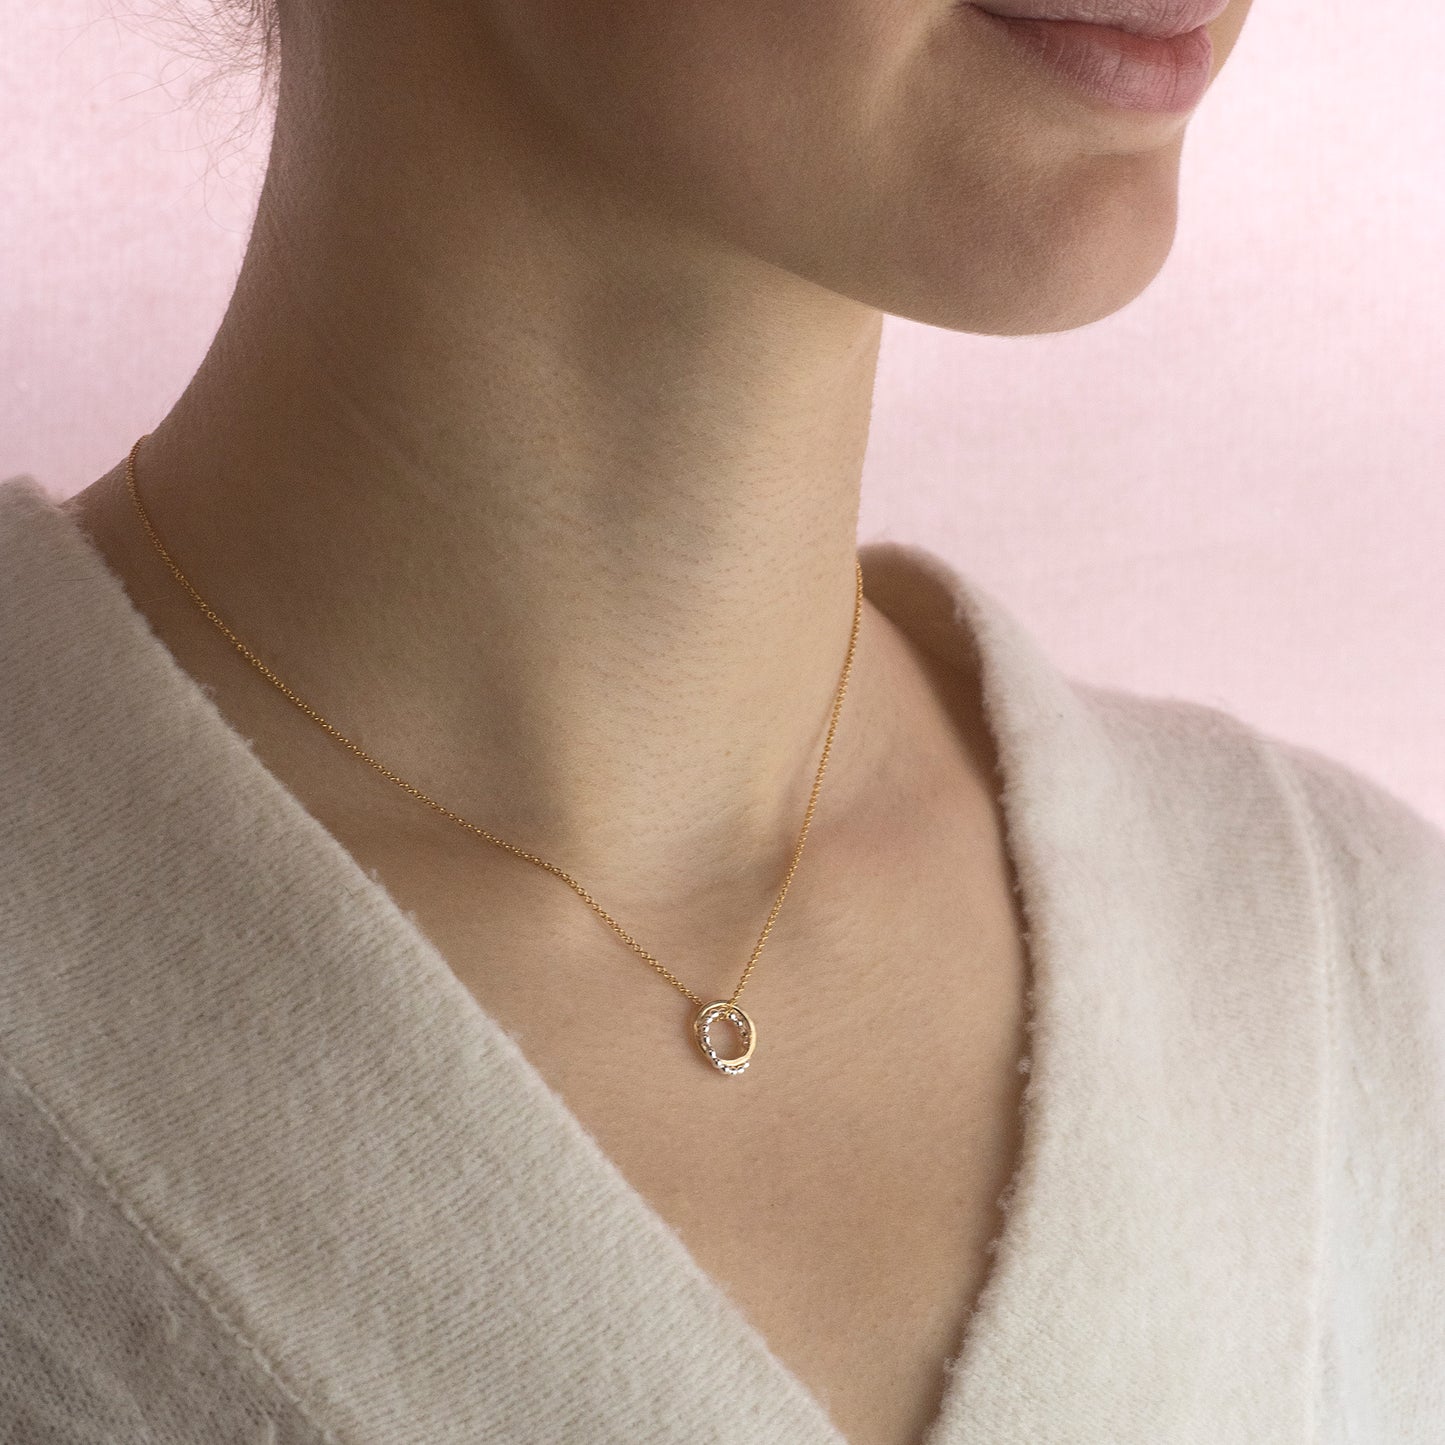 Double Link Love Knot Necklace - Linked for a Lifetime - Silver & Gold